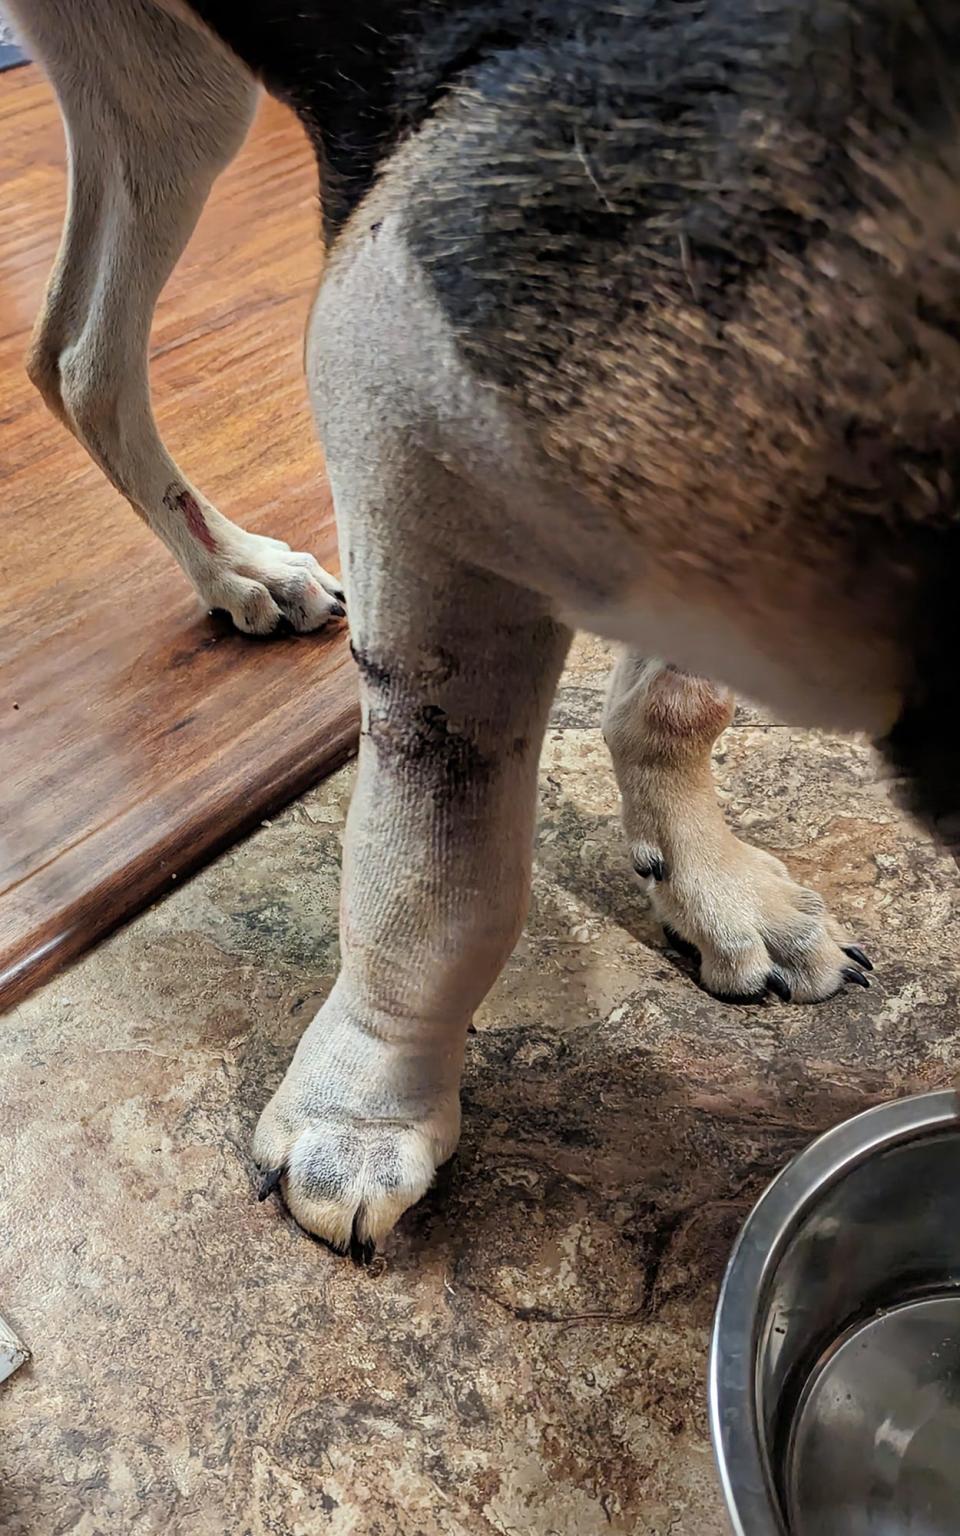 Mable's swollen front right paw shortly after the rattle snake bite. The two fang marks are visible mid-way up the paw.